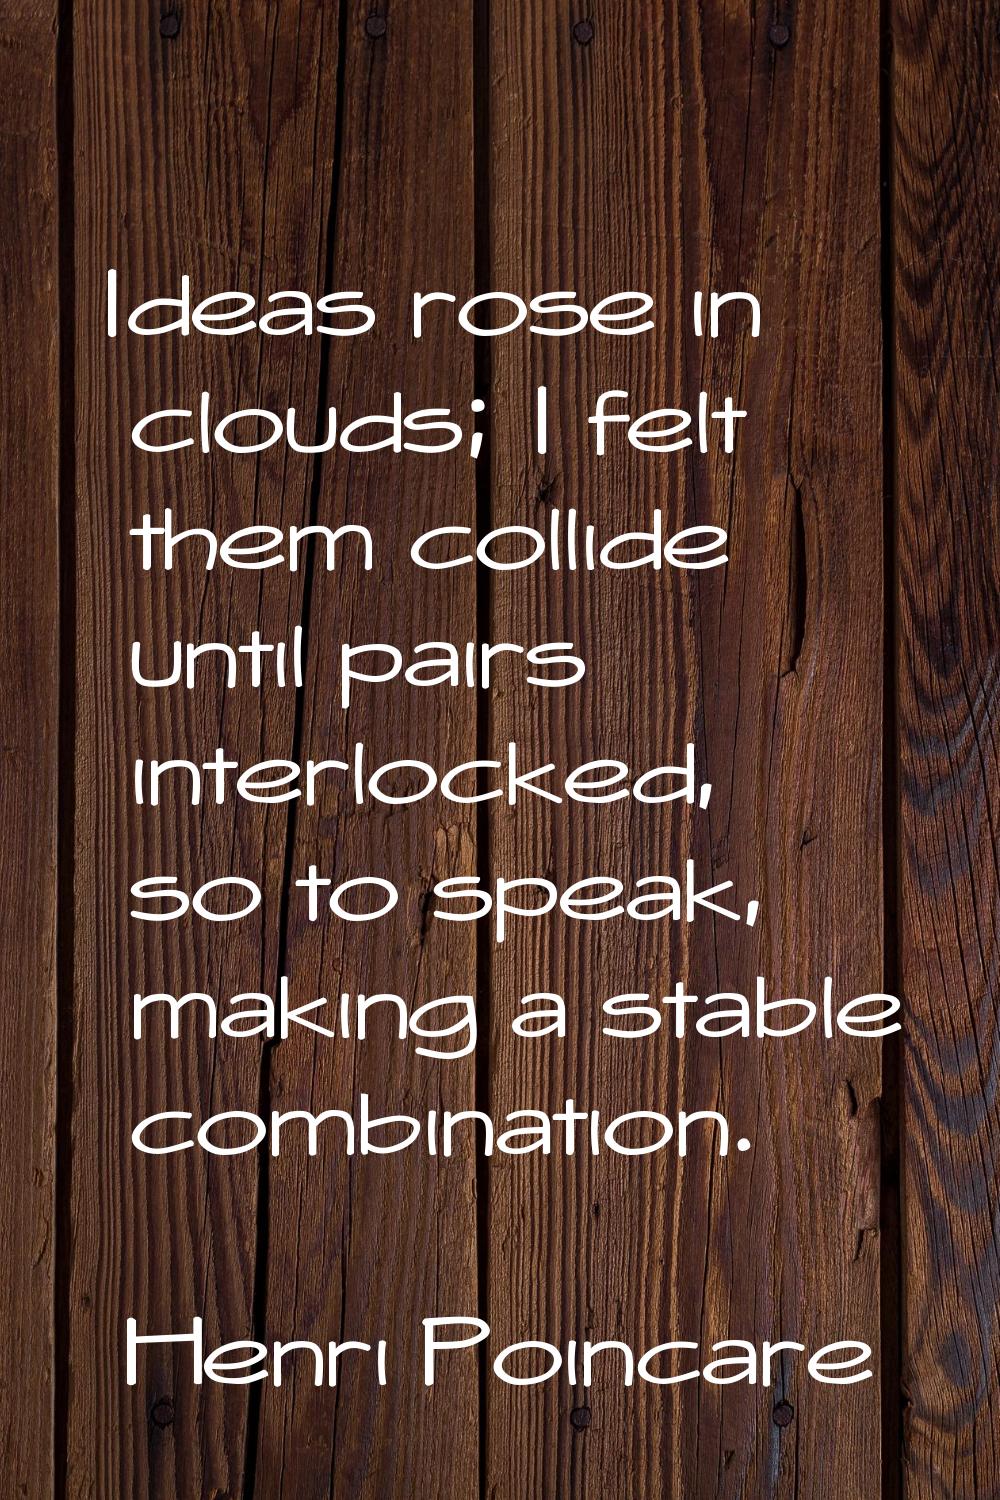 Ideas rose in clouds; I felt them collide until pairs interlocked, so to speak, making a stable com